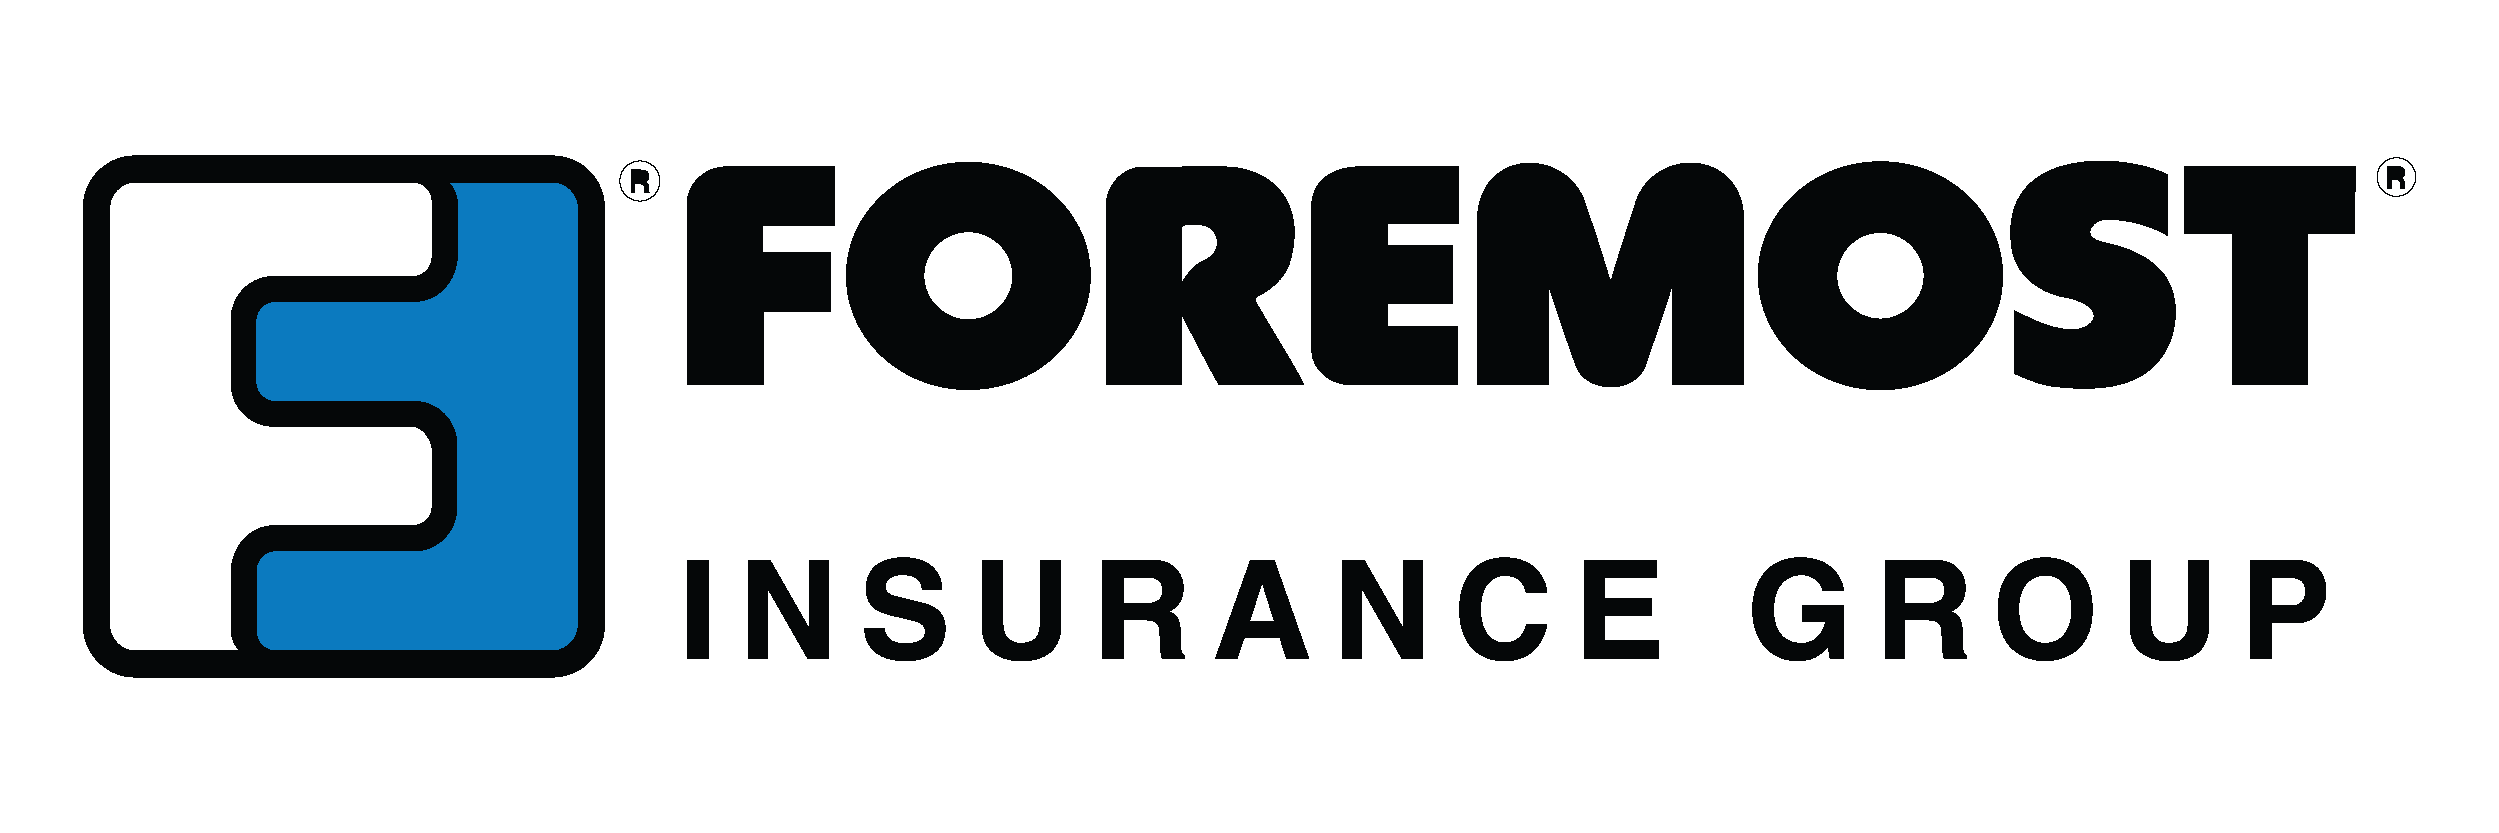 Foremost-Insurance-Group.png